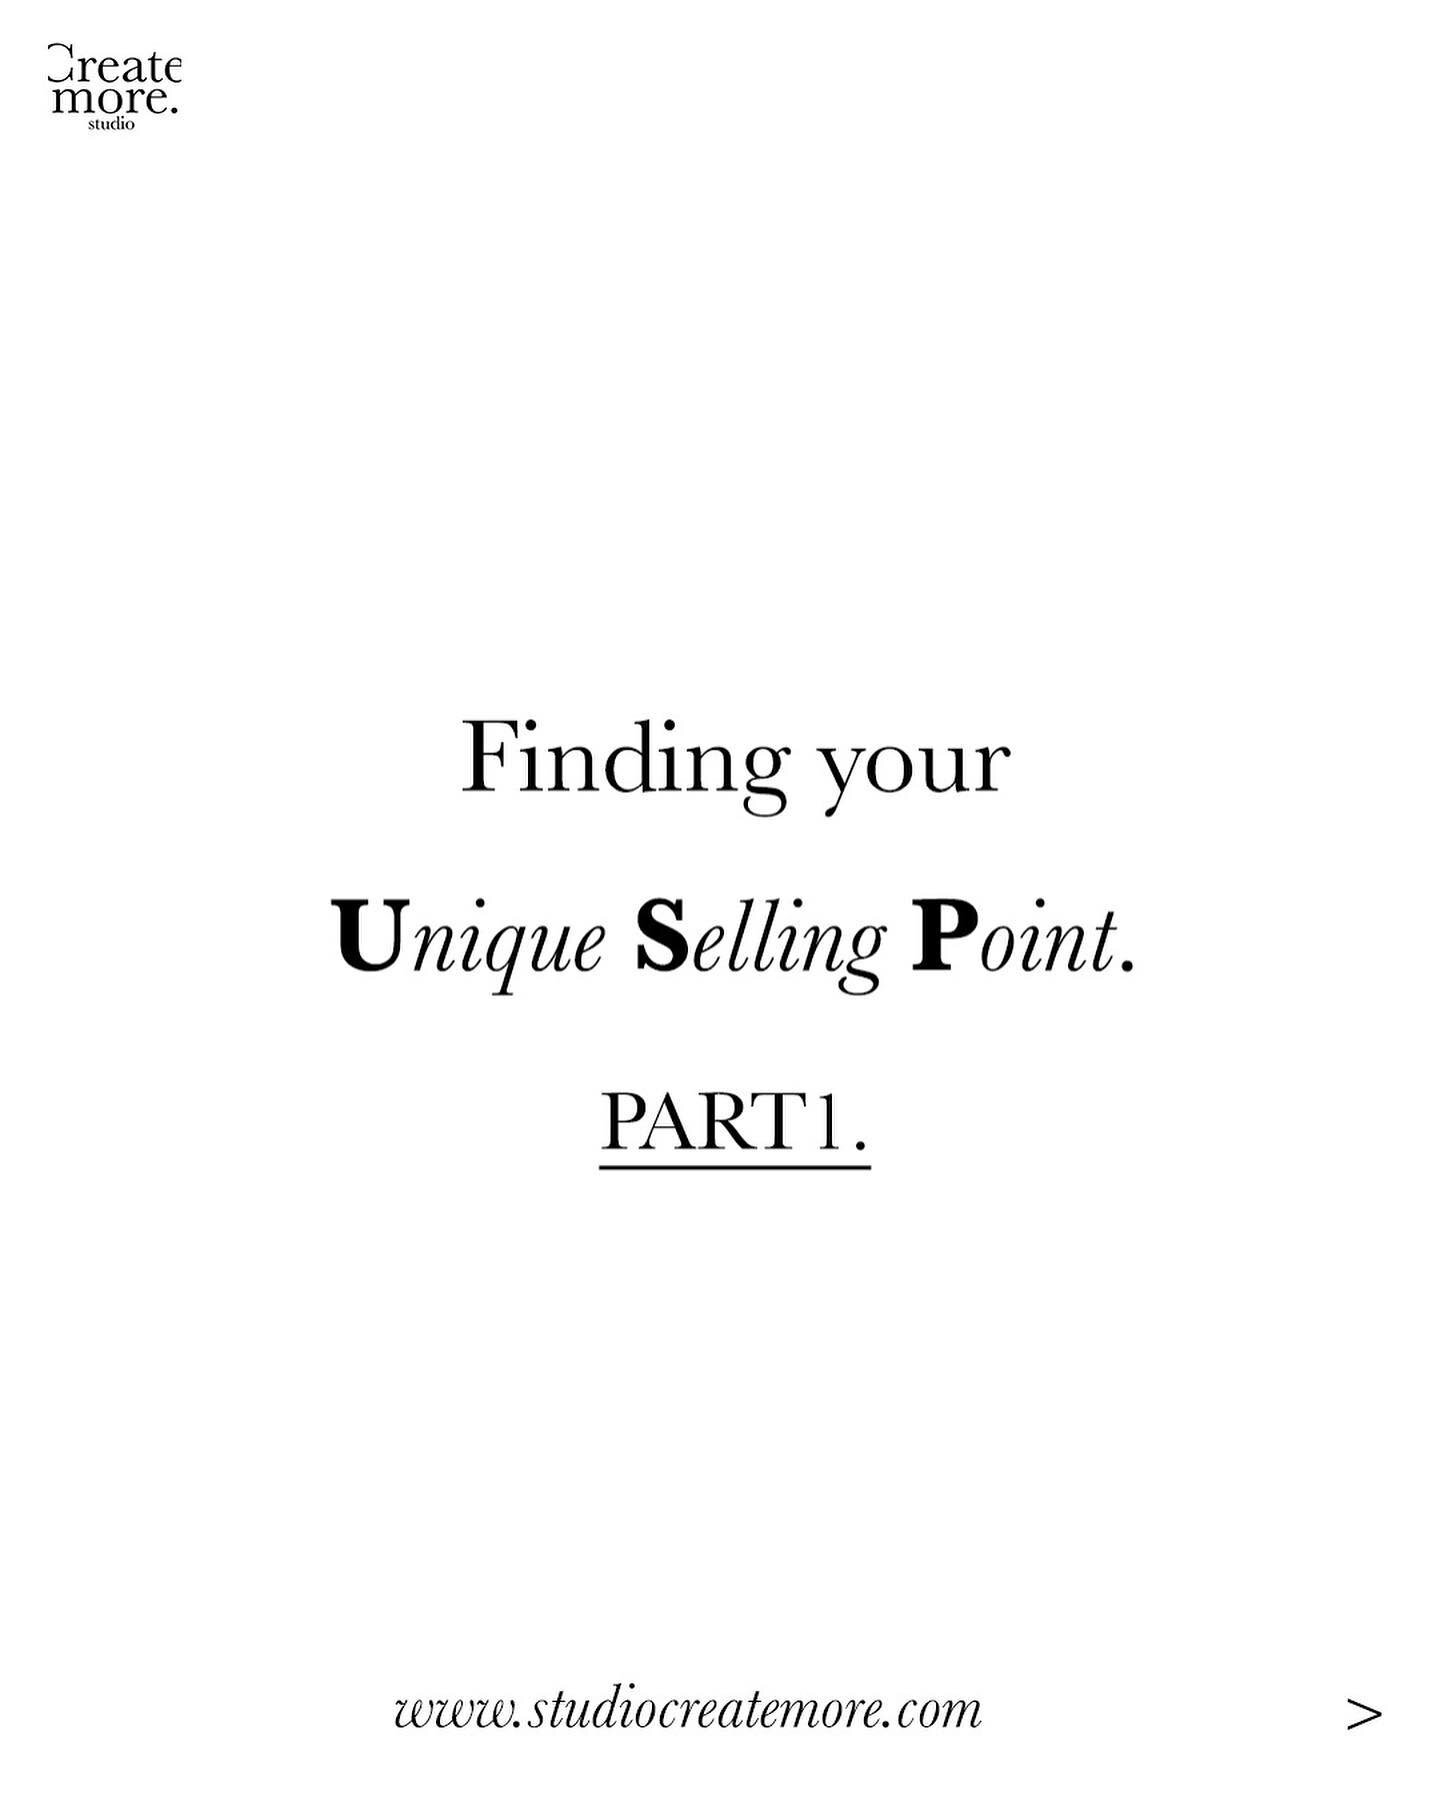 #studiocreatemore Finding your unique selling point (USP) is crucial for differentiating your business from competitors and attracting customers. Here's a step-by-step process to help you identify your USP #Part1